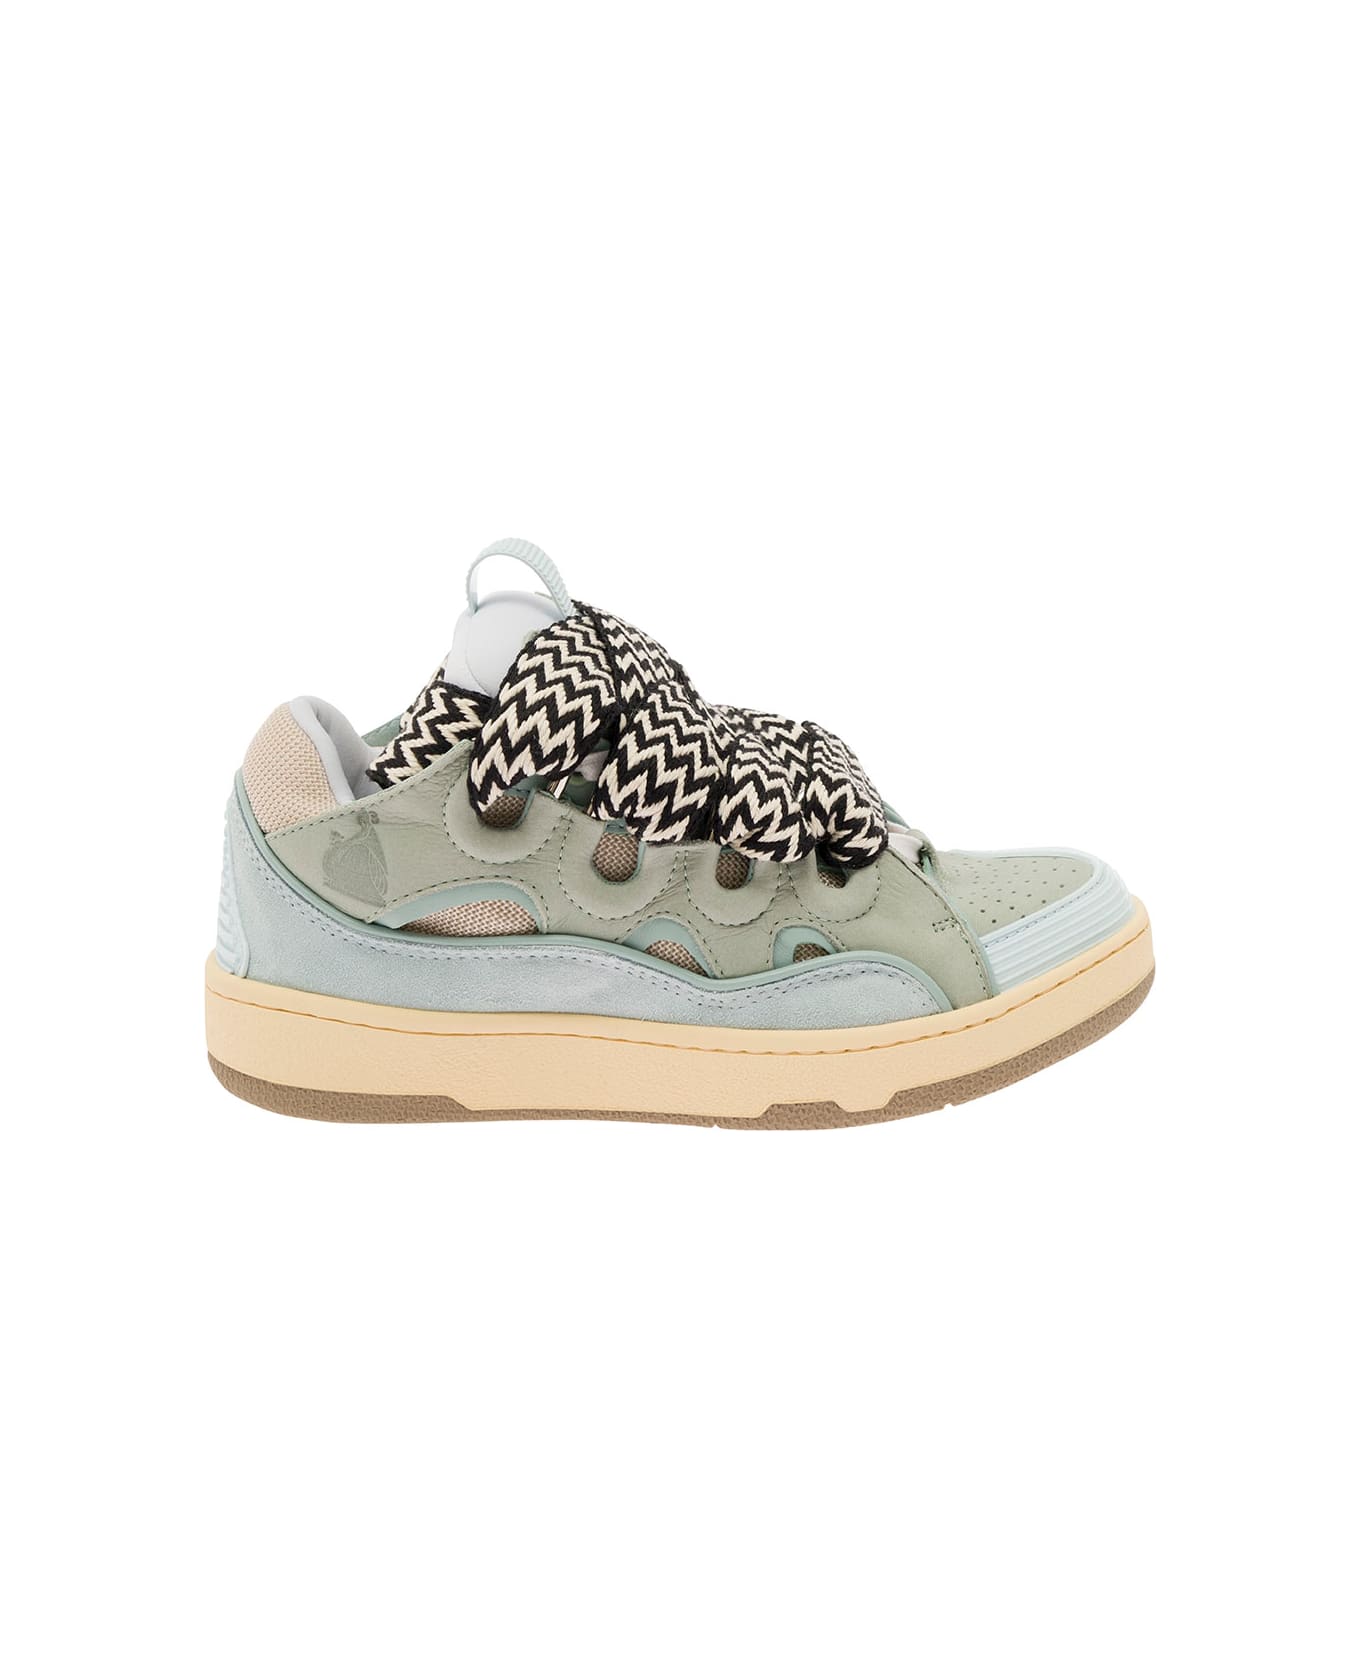 Lanvin 'curb' Multicolor Low-top Sneaker With Oversized Laces In Leather Woman - Light blue